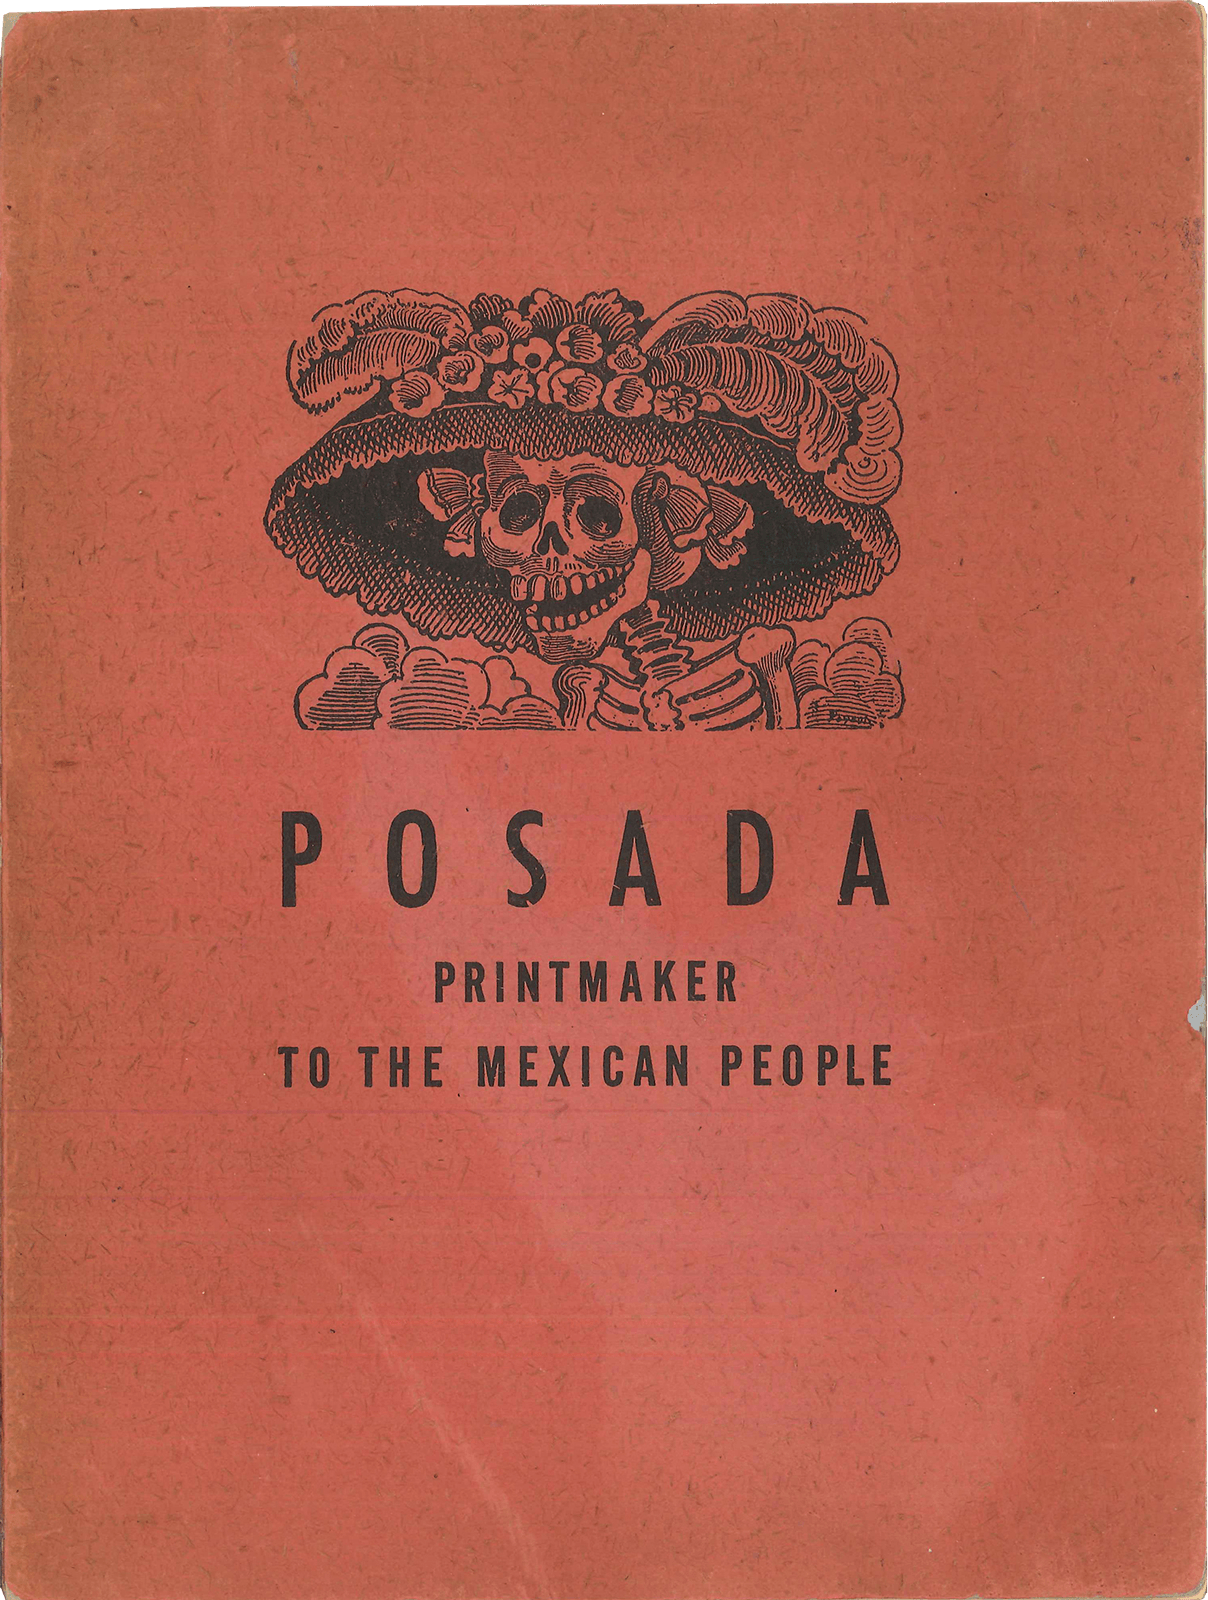 Posada. Printmaker to the Mexican People., 1944